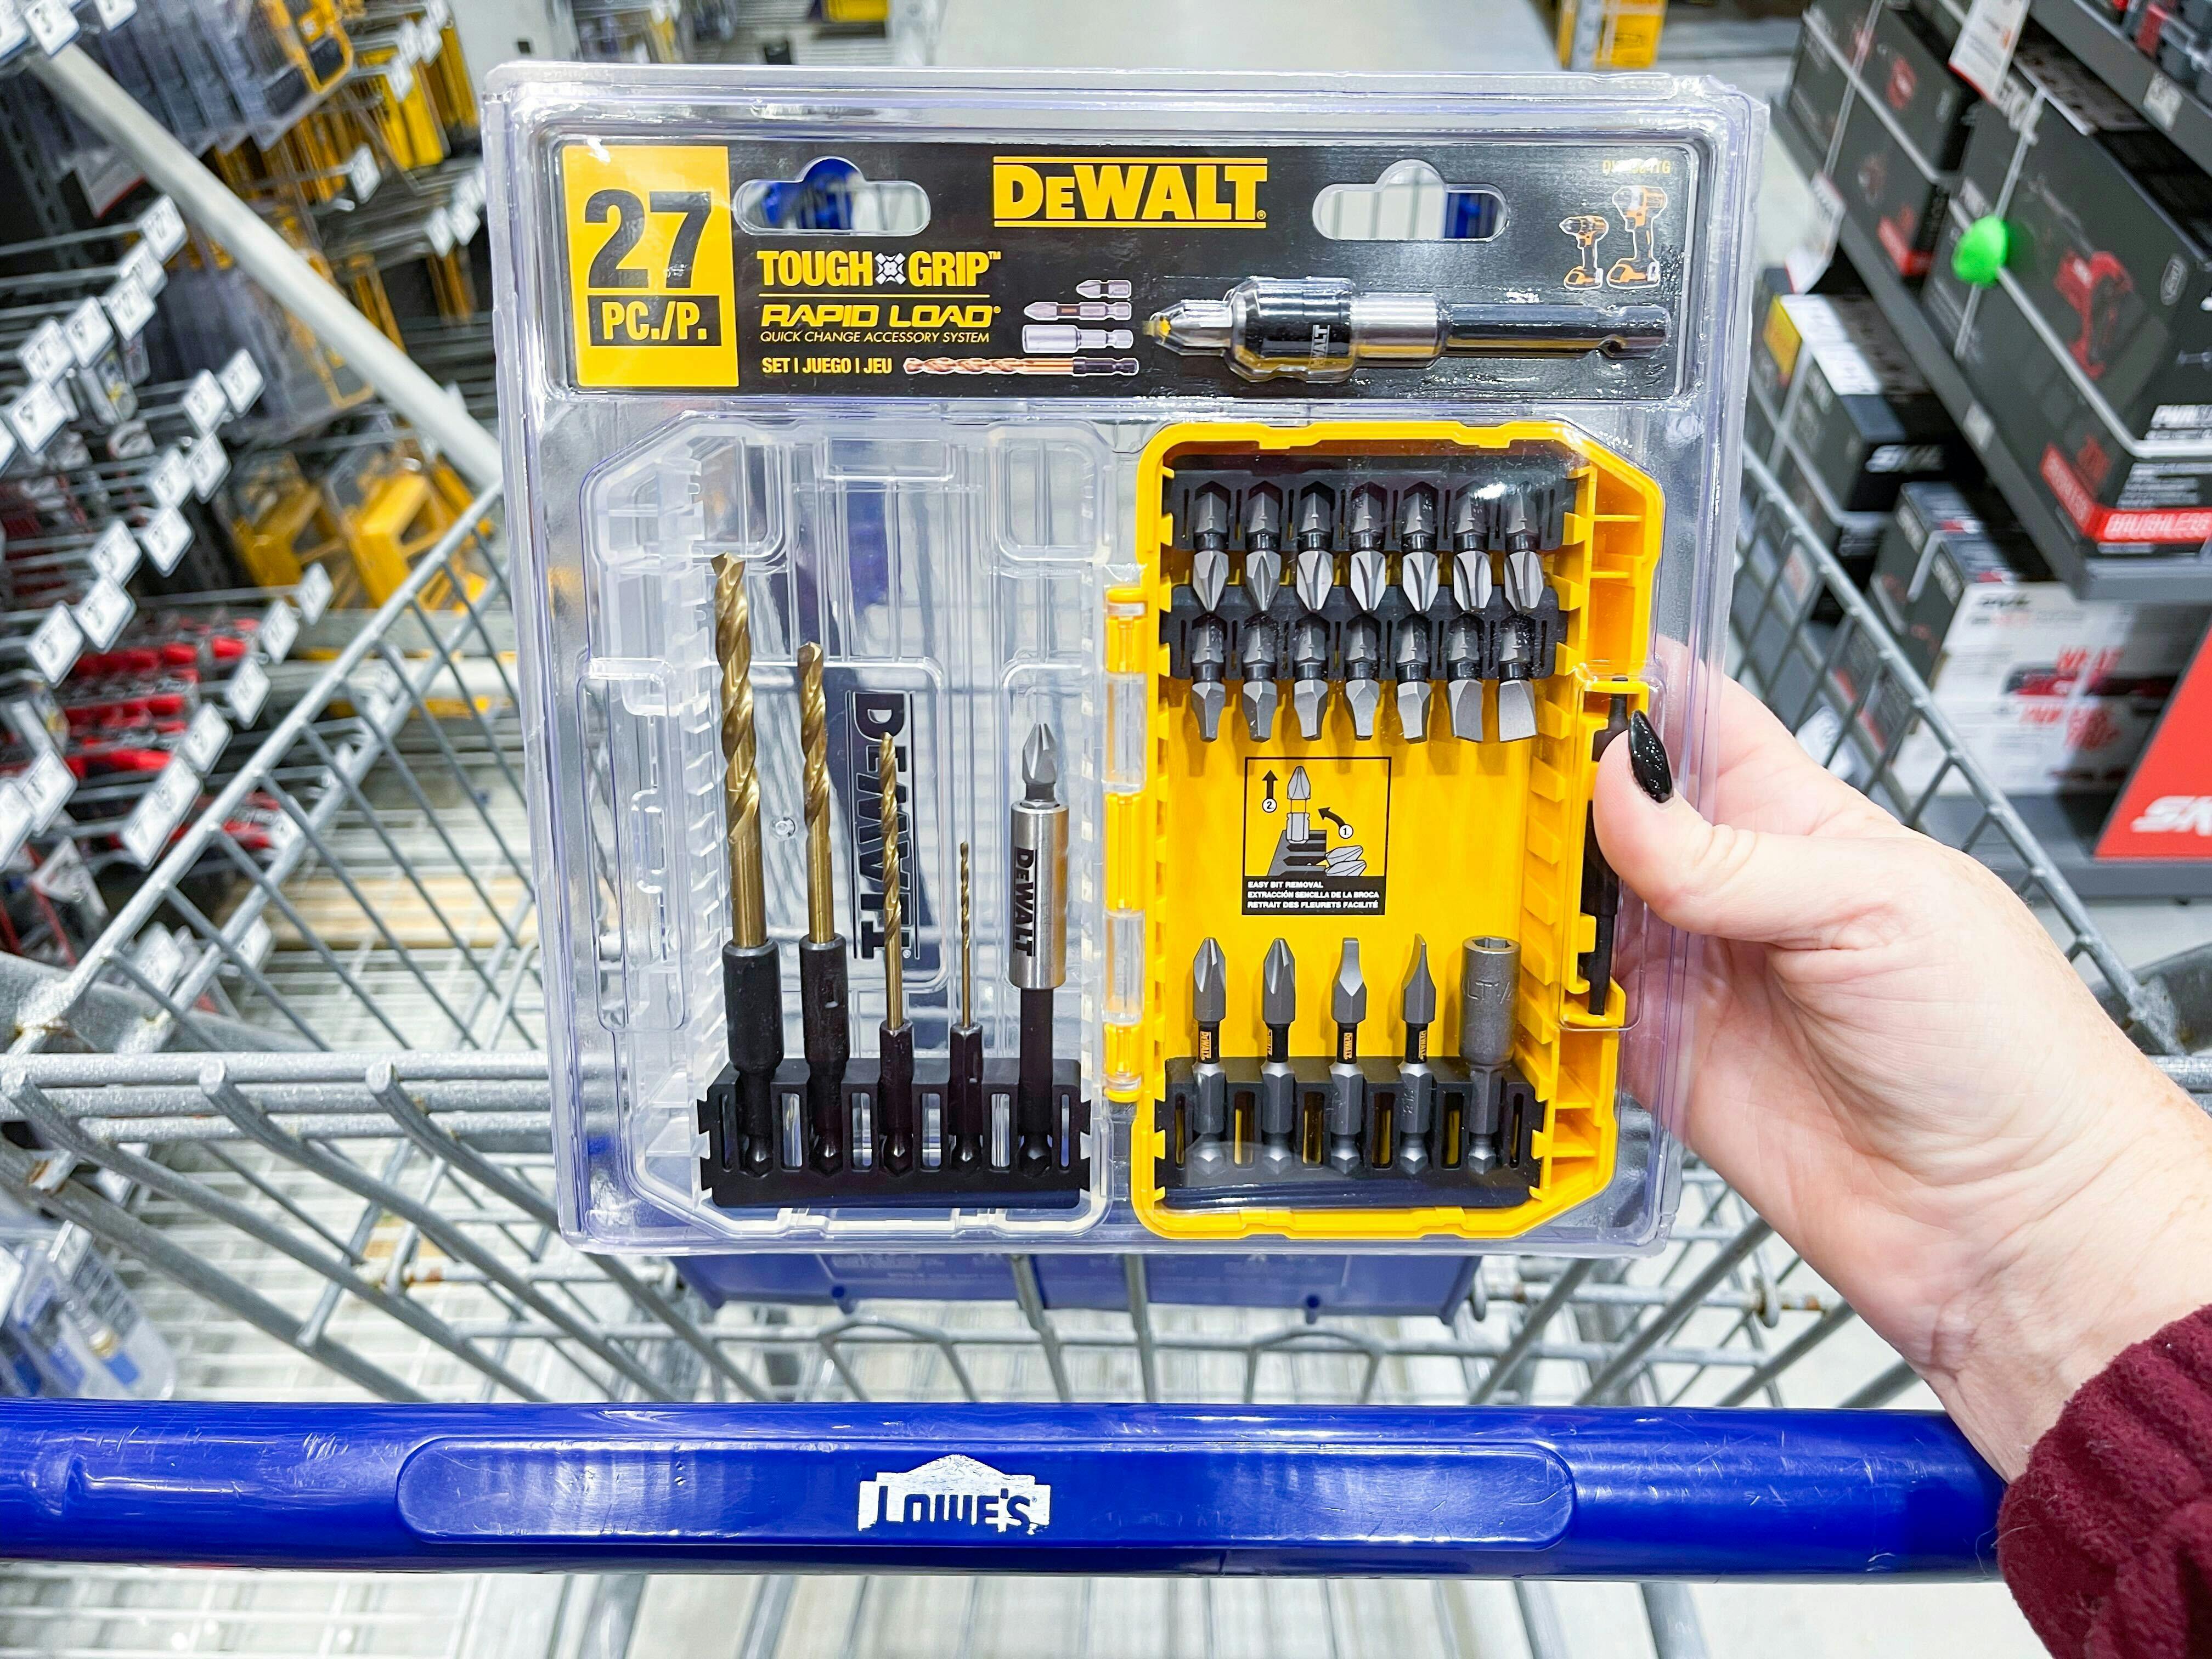 a woman's hand holding a dewalt drill bit set in front of a lowe's cart on black friday